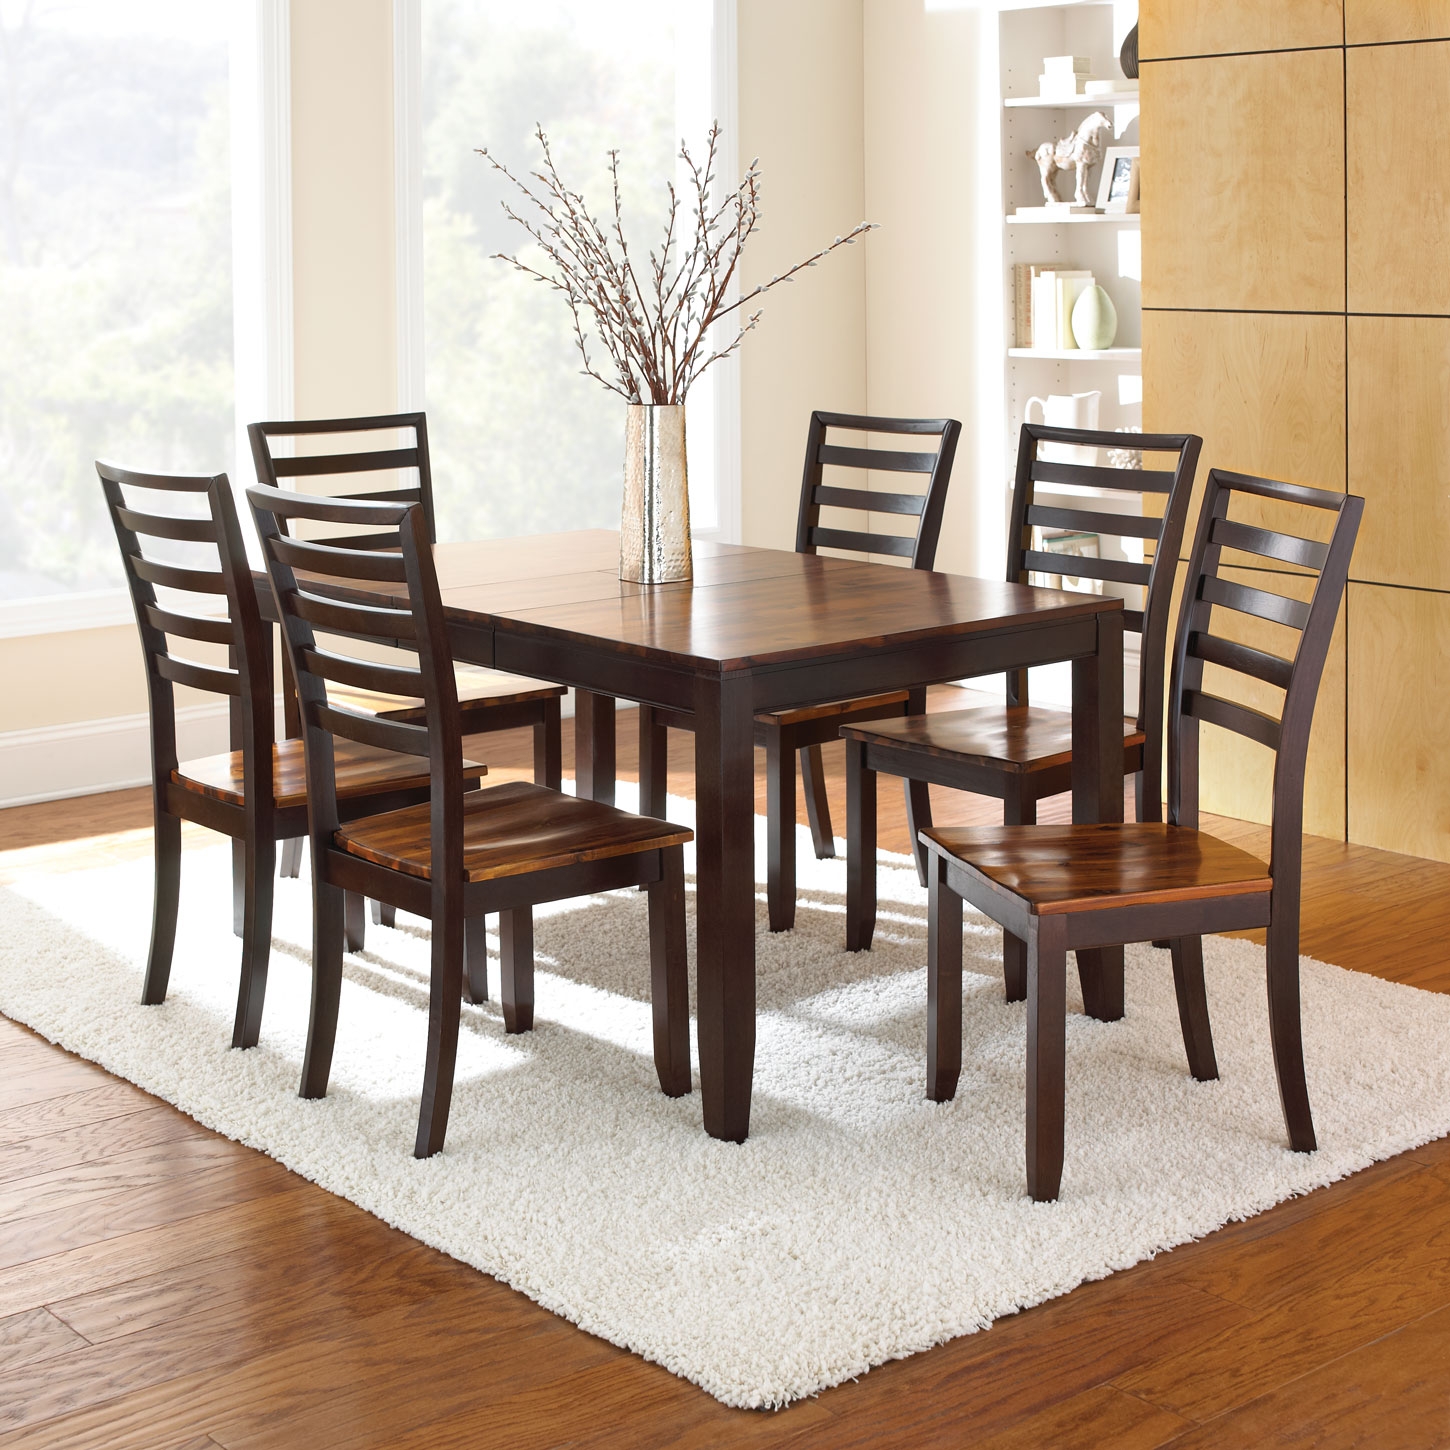 Steve Silver Co.® Abaco 5 Piece Dining Set